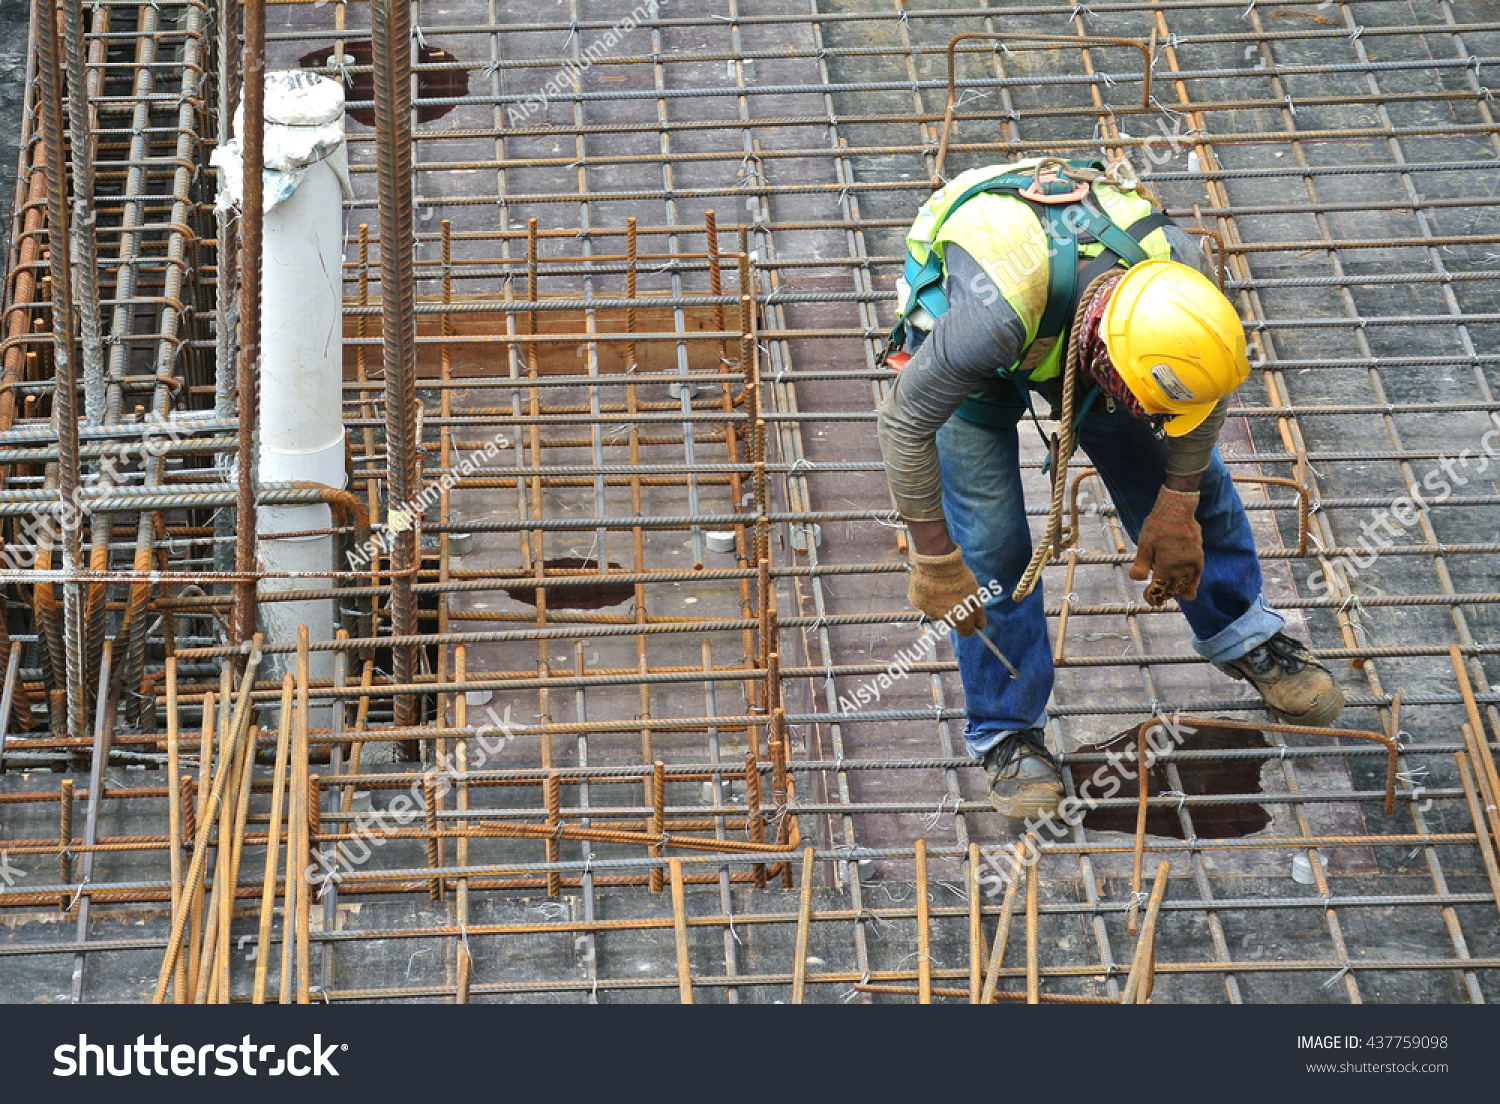 MALACCA, MALAYSIA -MAY 27, 2016: Construction workers fabricating steel reinforcement bar at the construction site in Malacca, Malaysia. The reinforcement bar was ties together using tiny wire.   #437759098